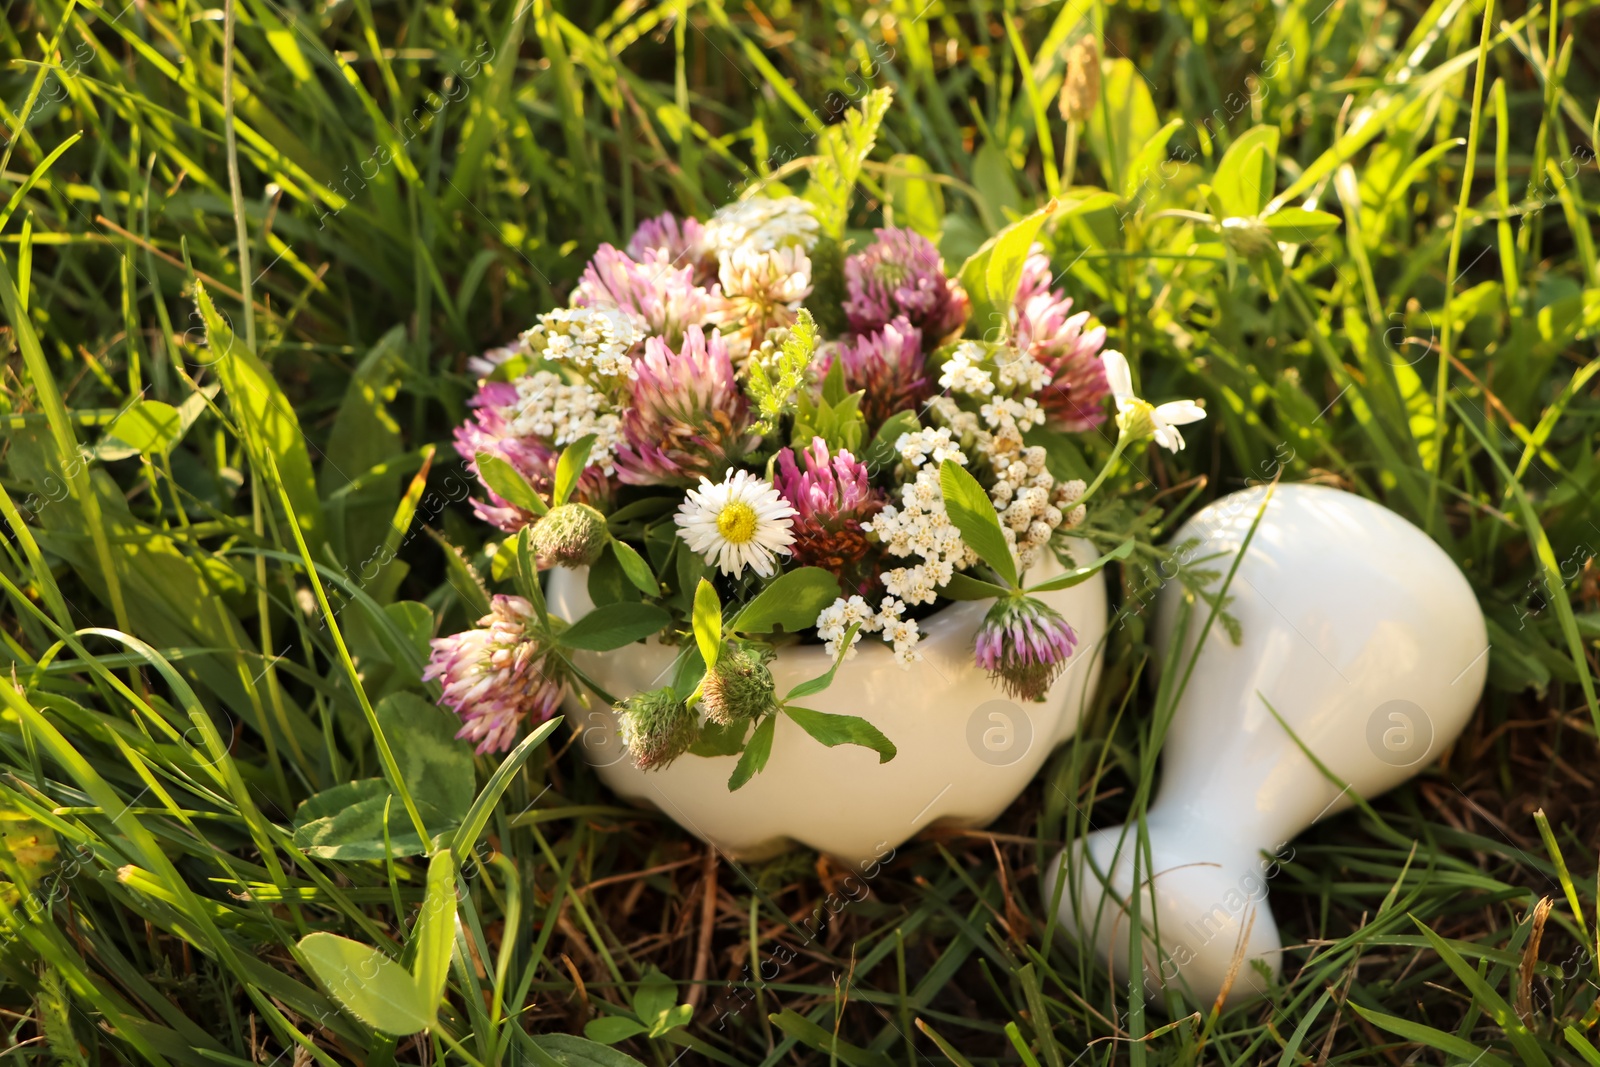 Photo of Ceramic mortar with pestle, different wildflowers and herbs green grass outdoors